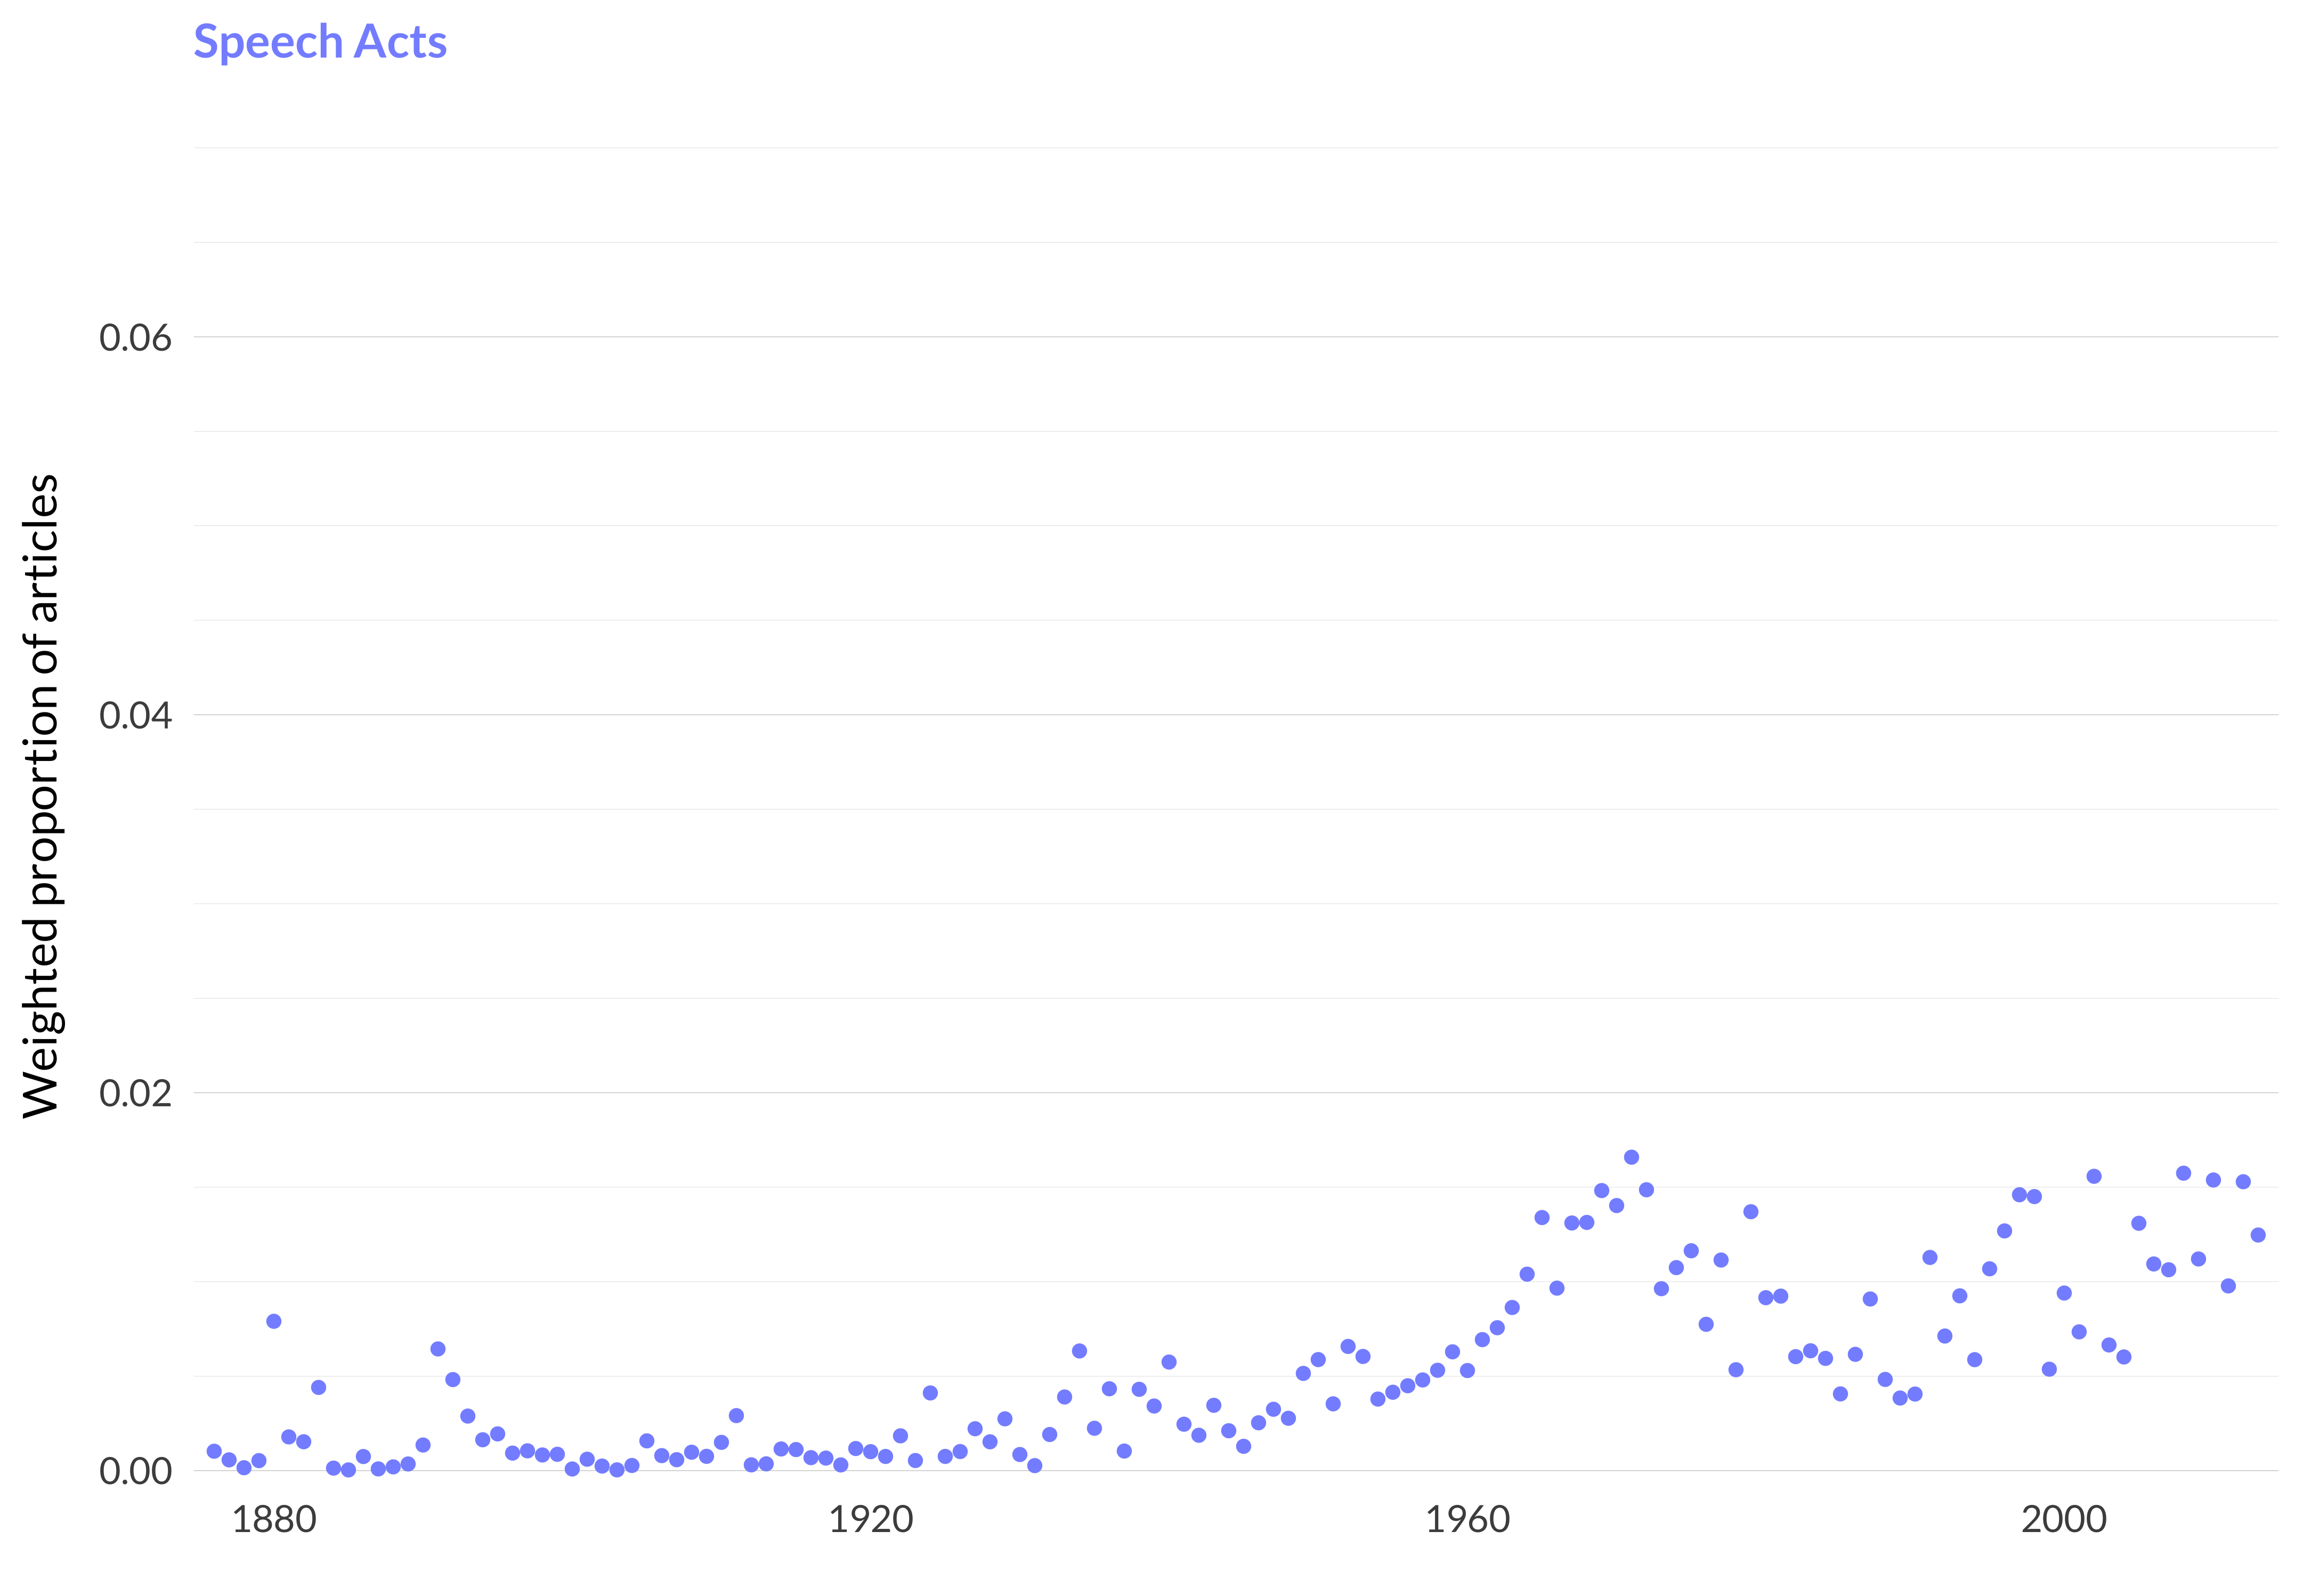 A scatterplot showing which proportion of articles each year are in the speech actstopic. The x-axis shows the year, the y-axis measures the proportion of articles each year in this topic. There is one dot per year. The highest value is in 1971 when 1.7% of articles were in this topic. The lowest value is in 1885 when 0.0% of articles were in this topic. The full table that provides the data for this graph is available in Table A.63 in Appendix A.